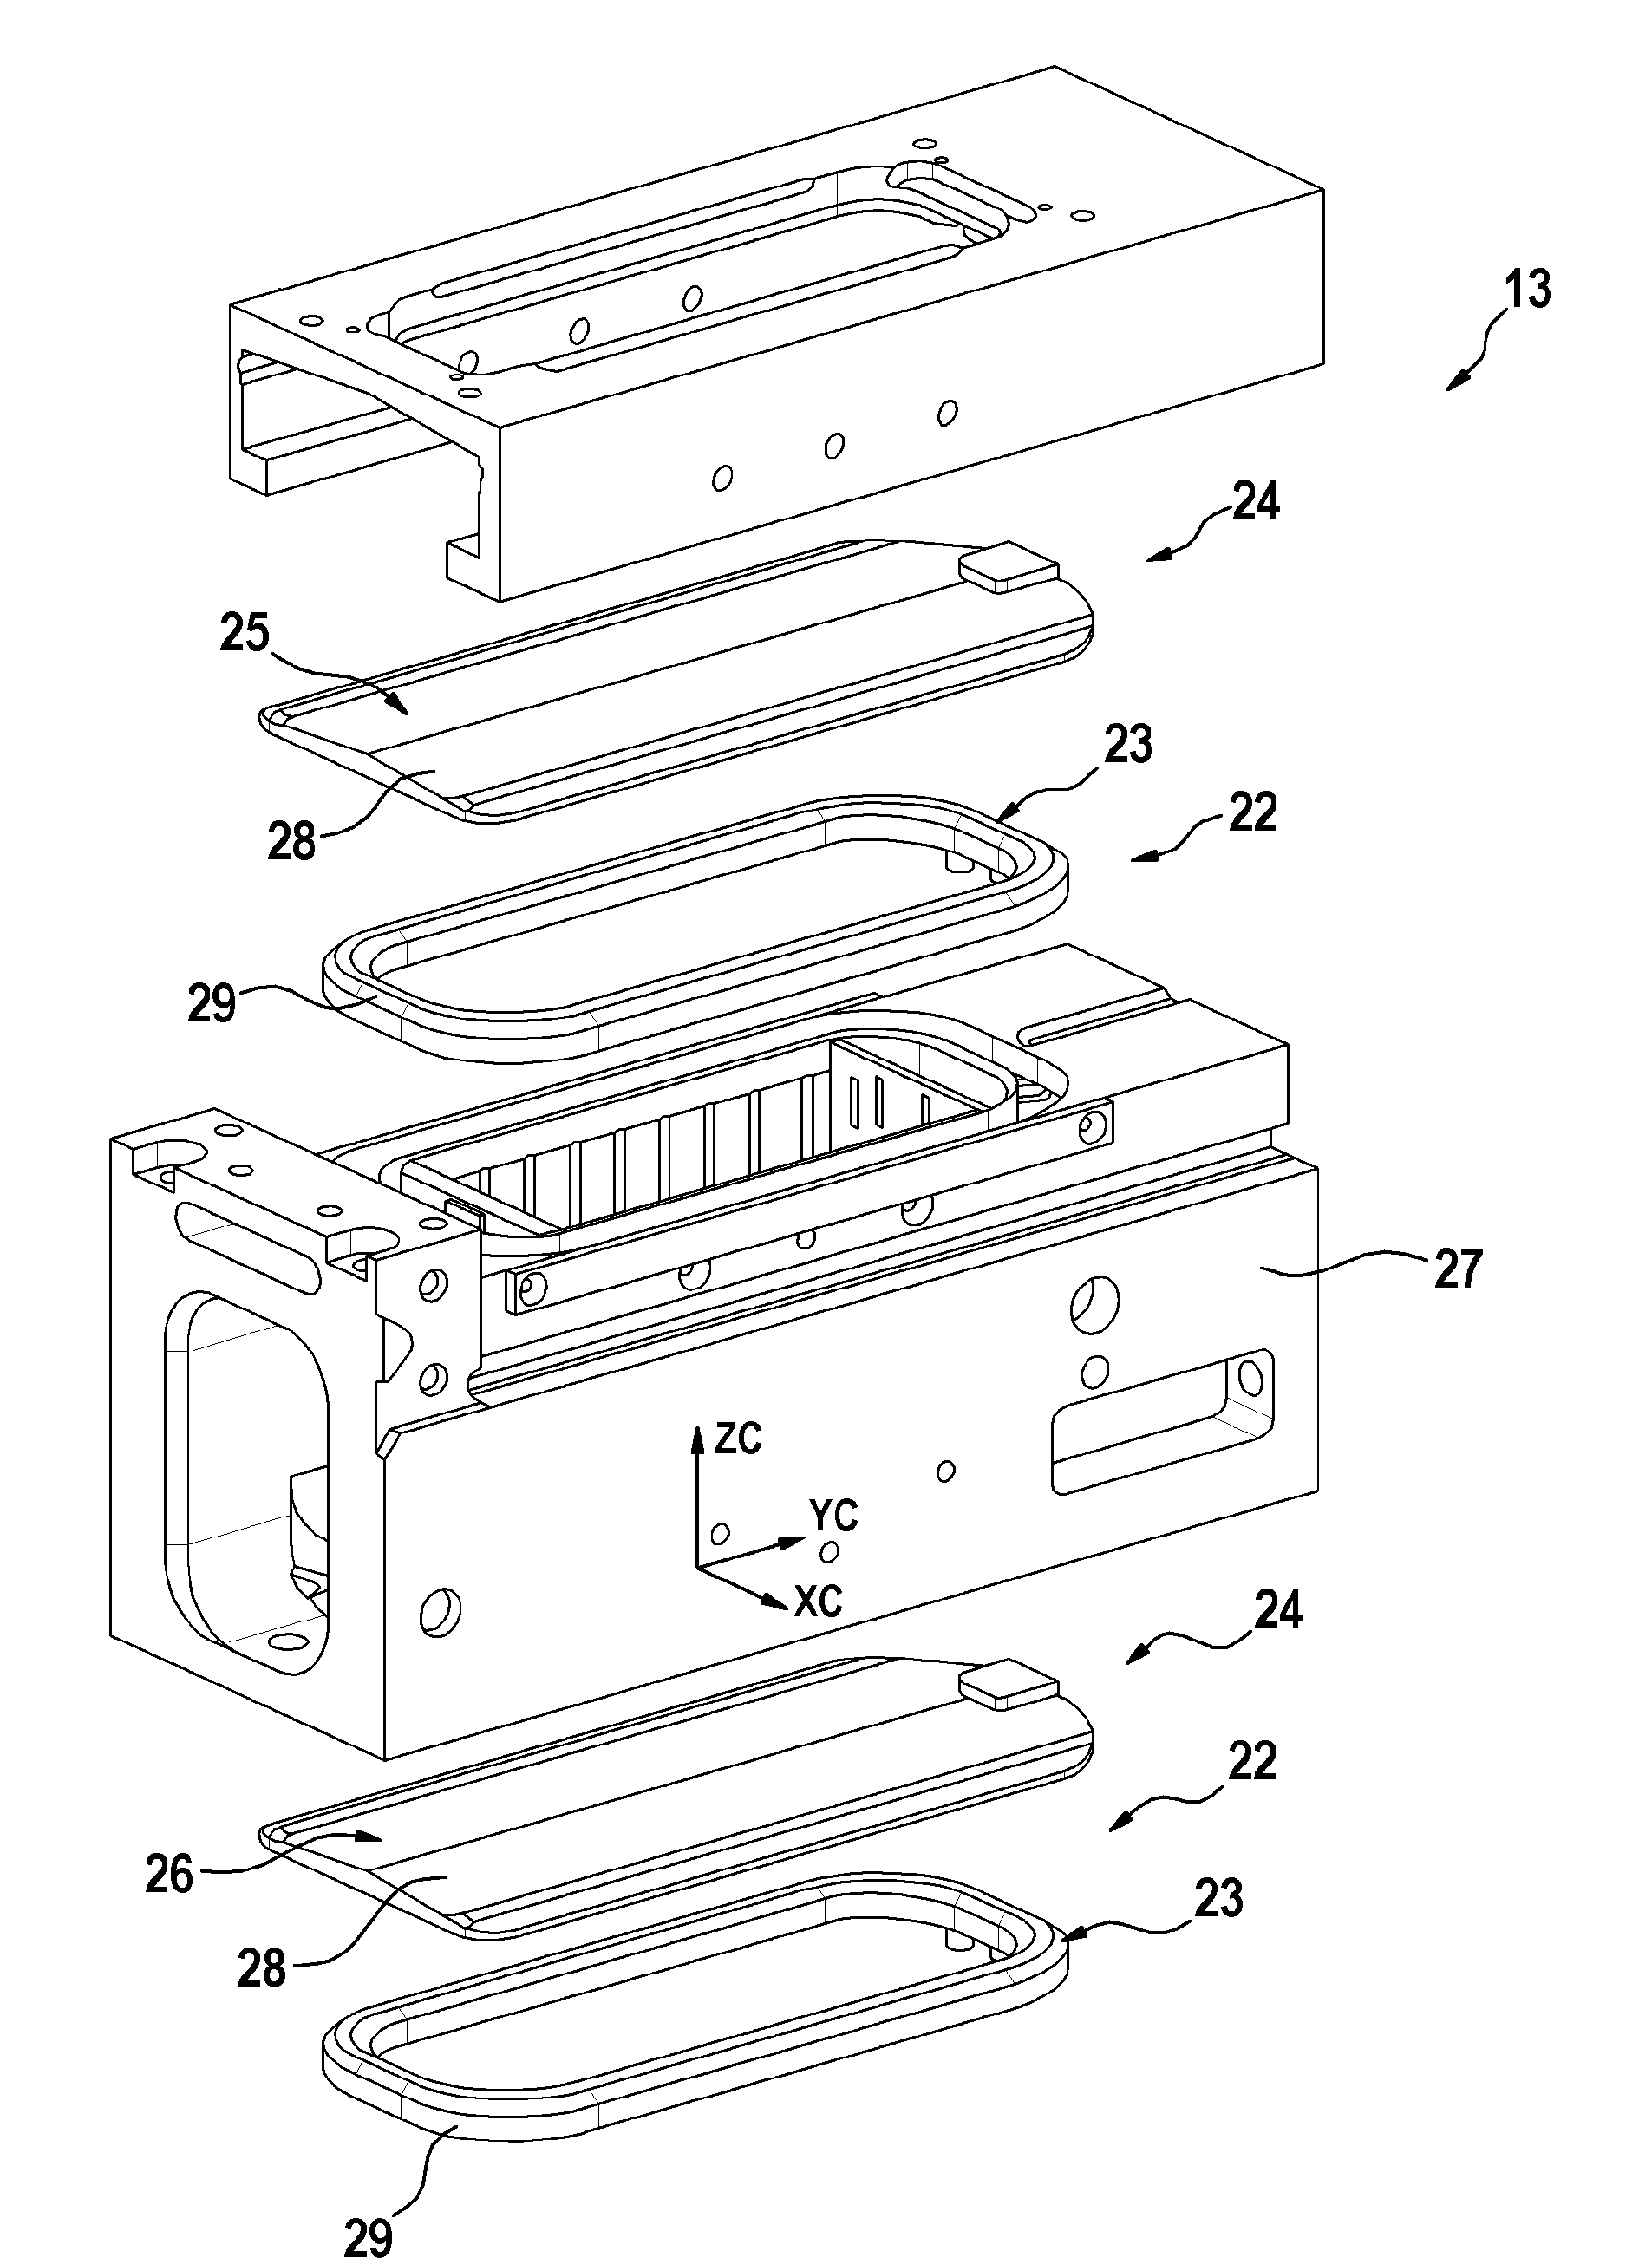 Filter rod transmission device and method in tobacco industry